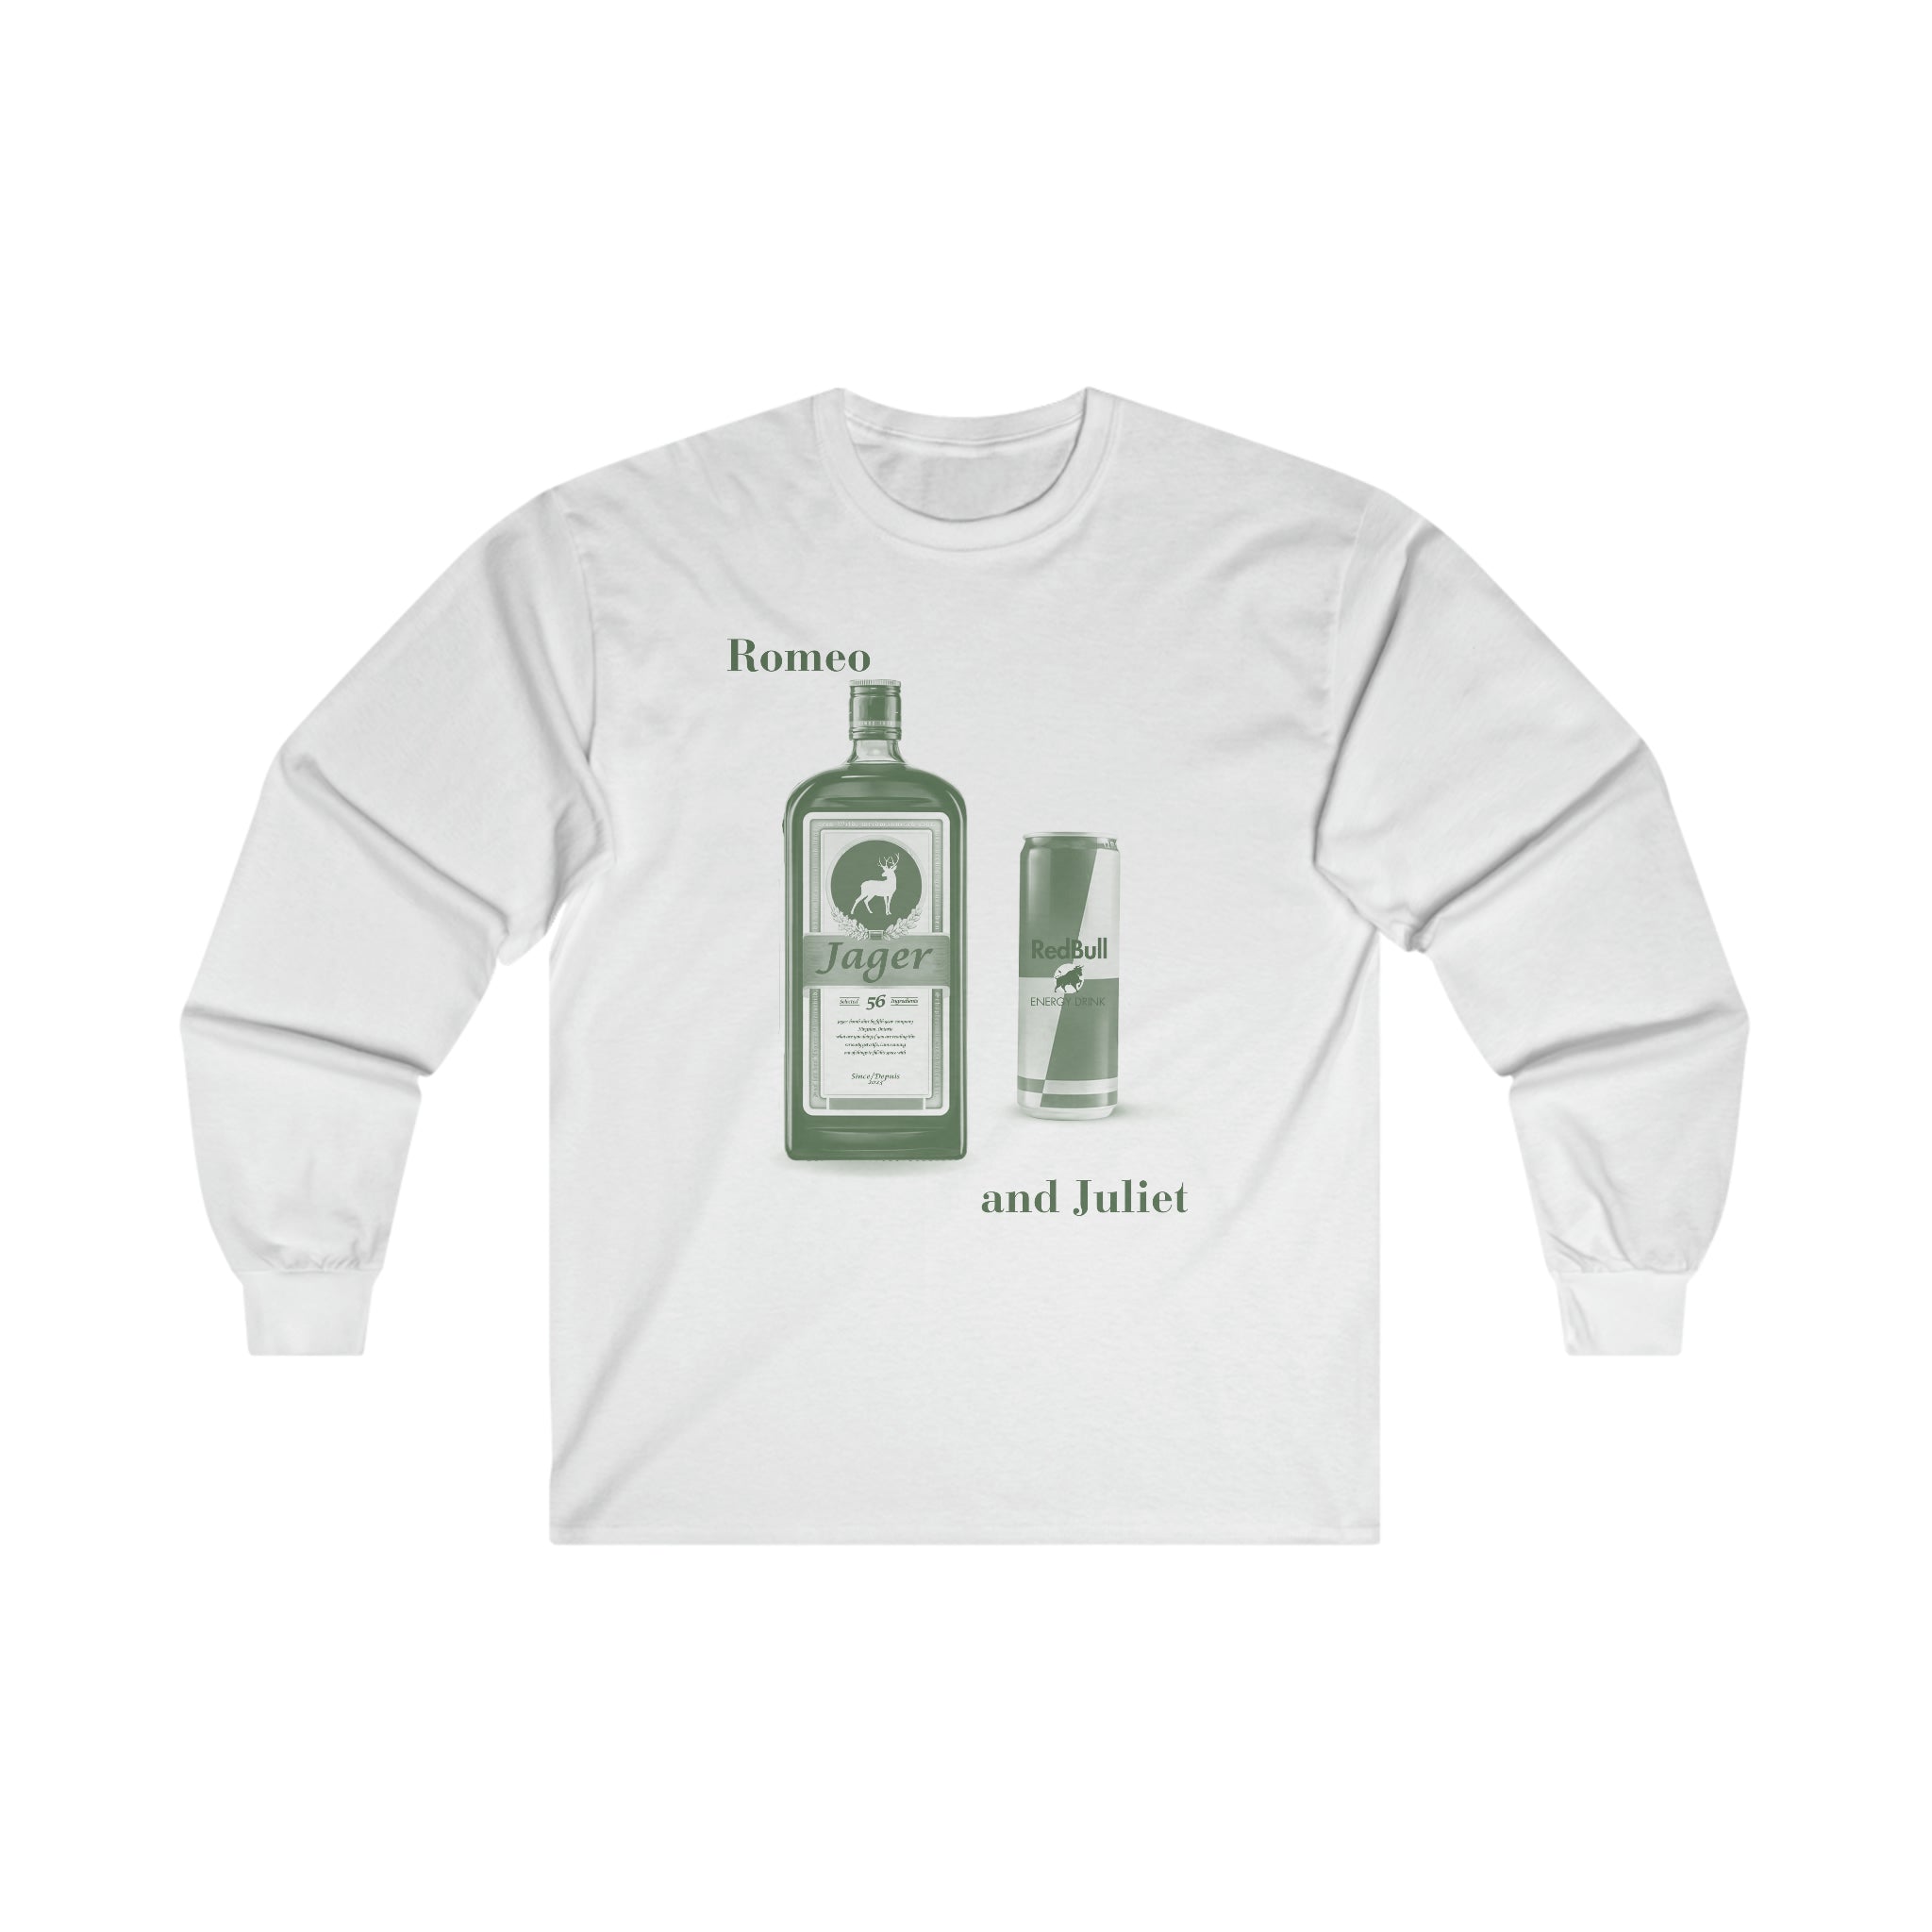 Romeo and Juliet Jagerbomb - Ultra Cotton Long Sleeve Tee